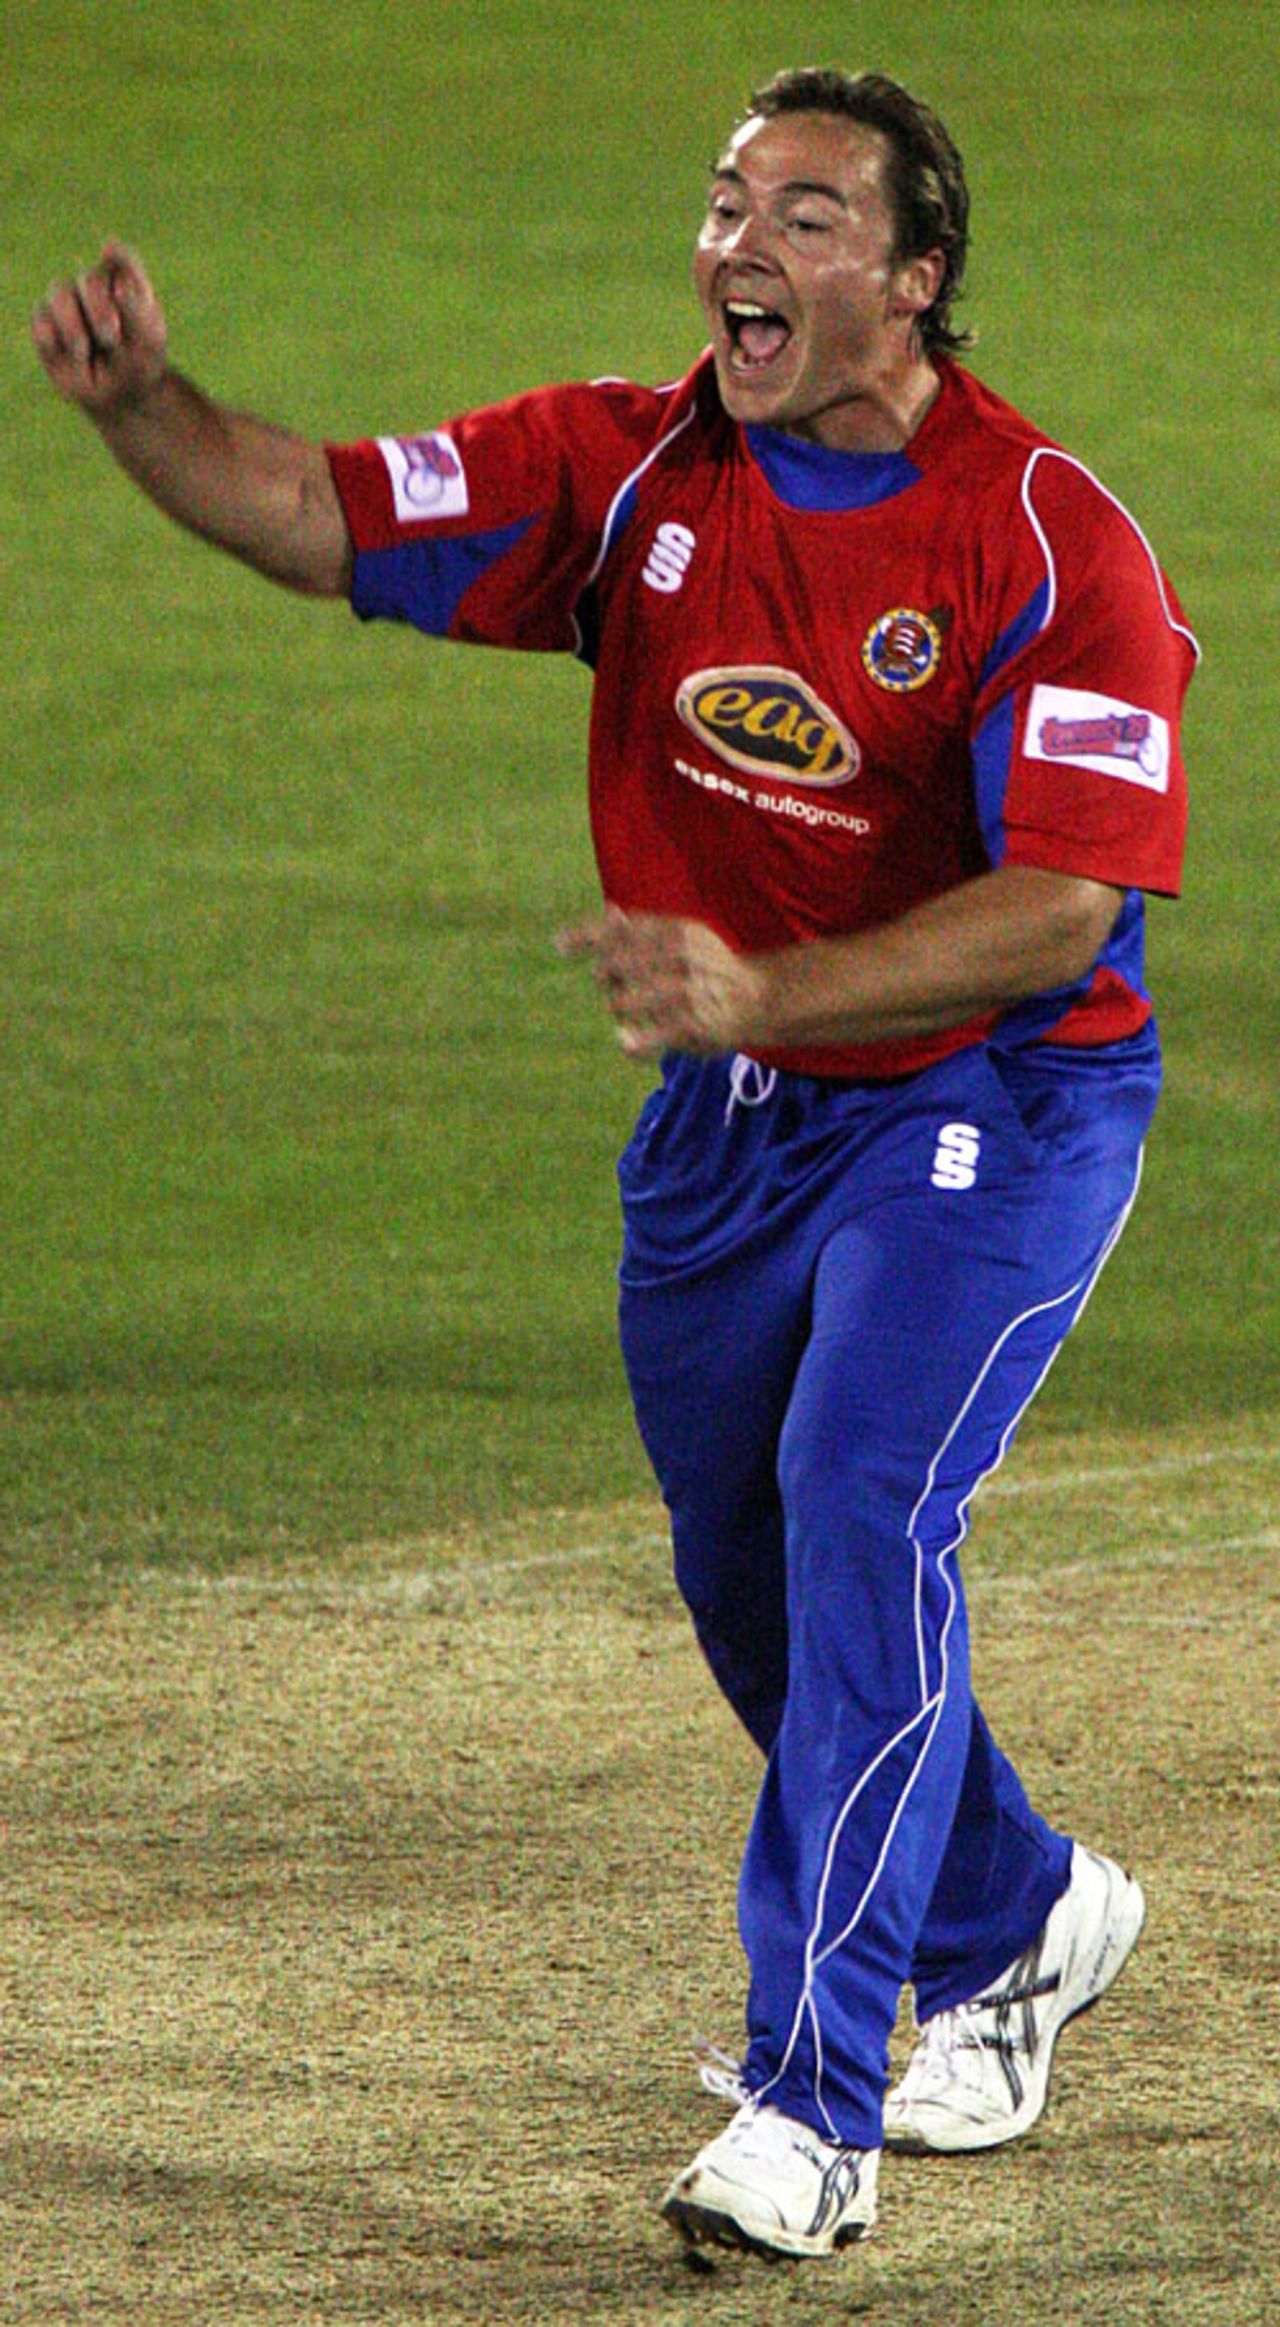 Graham Napier celebrates one of his four wickets, Essex v Northamptonshire, 2nd Quarter-Final, Twenty20 Cup, Chelmsford, July 7, 2008